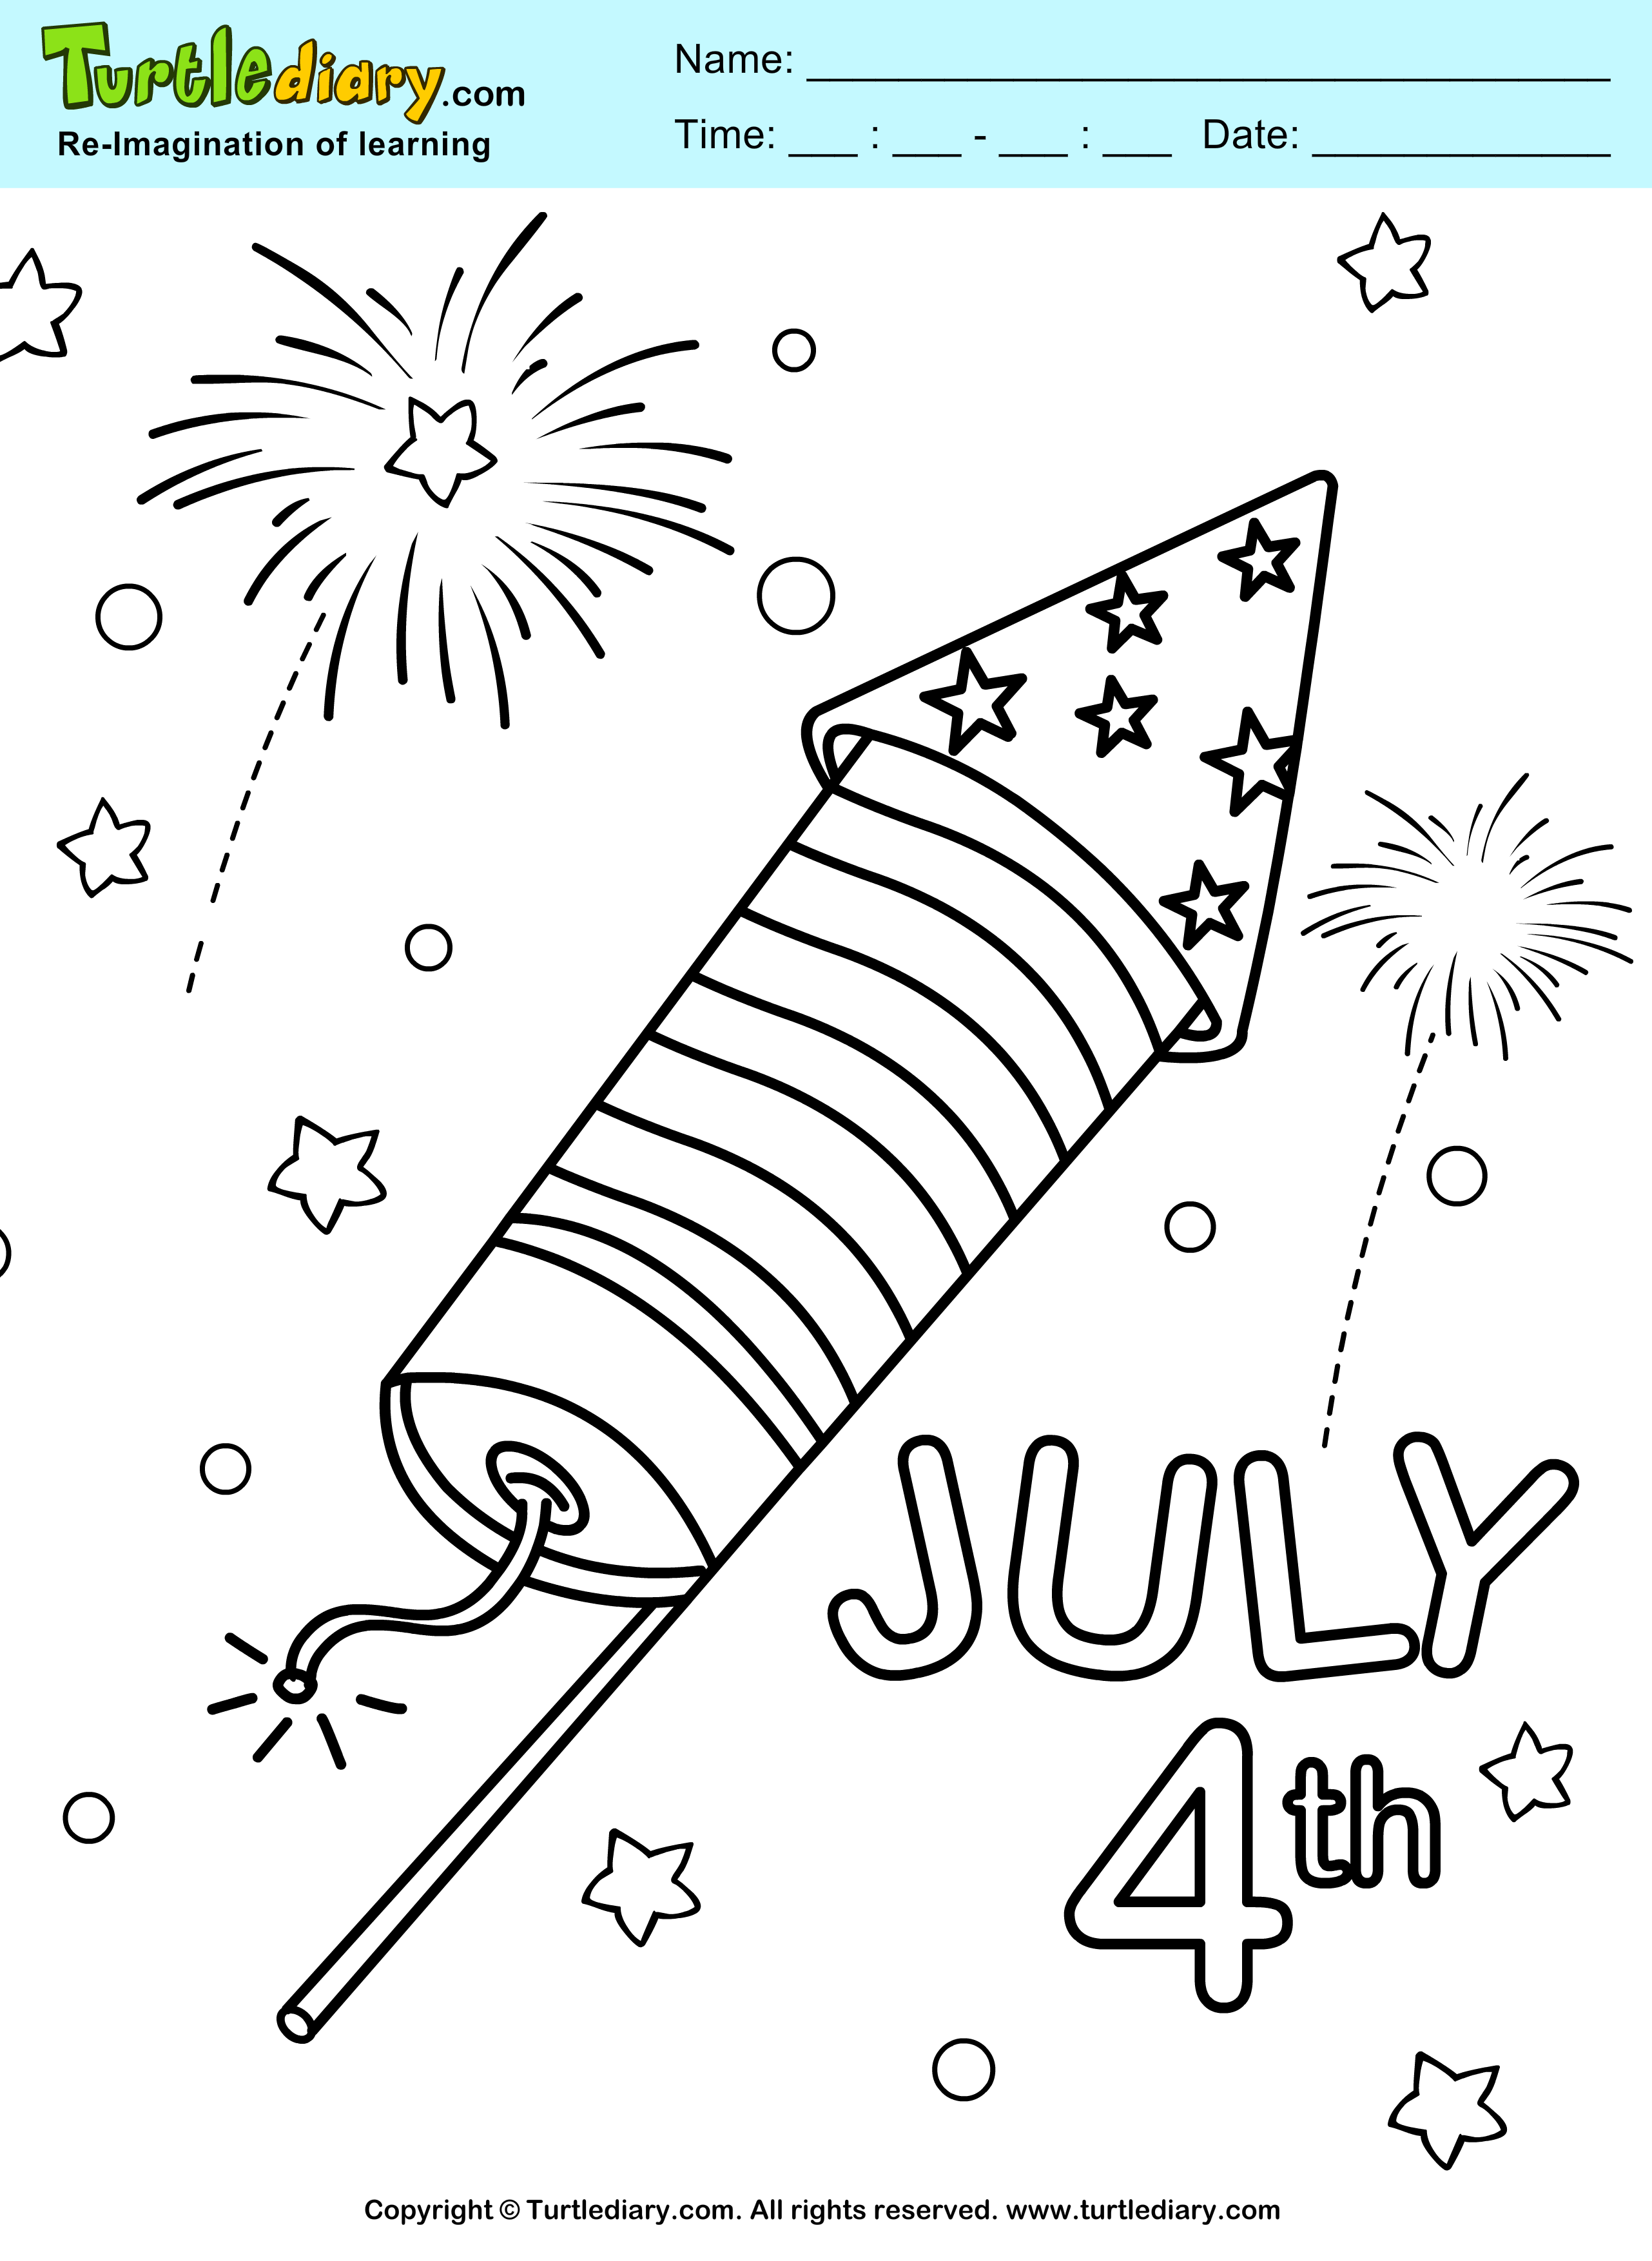 4th of July Fireworks Coloring Sheet - Turtle Diary